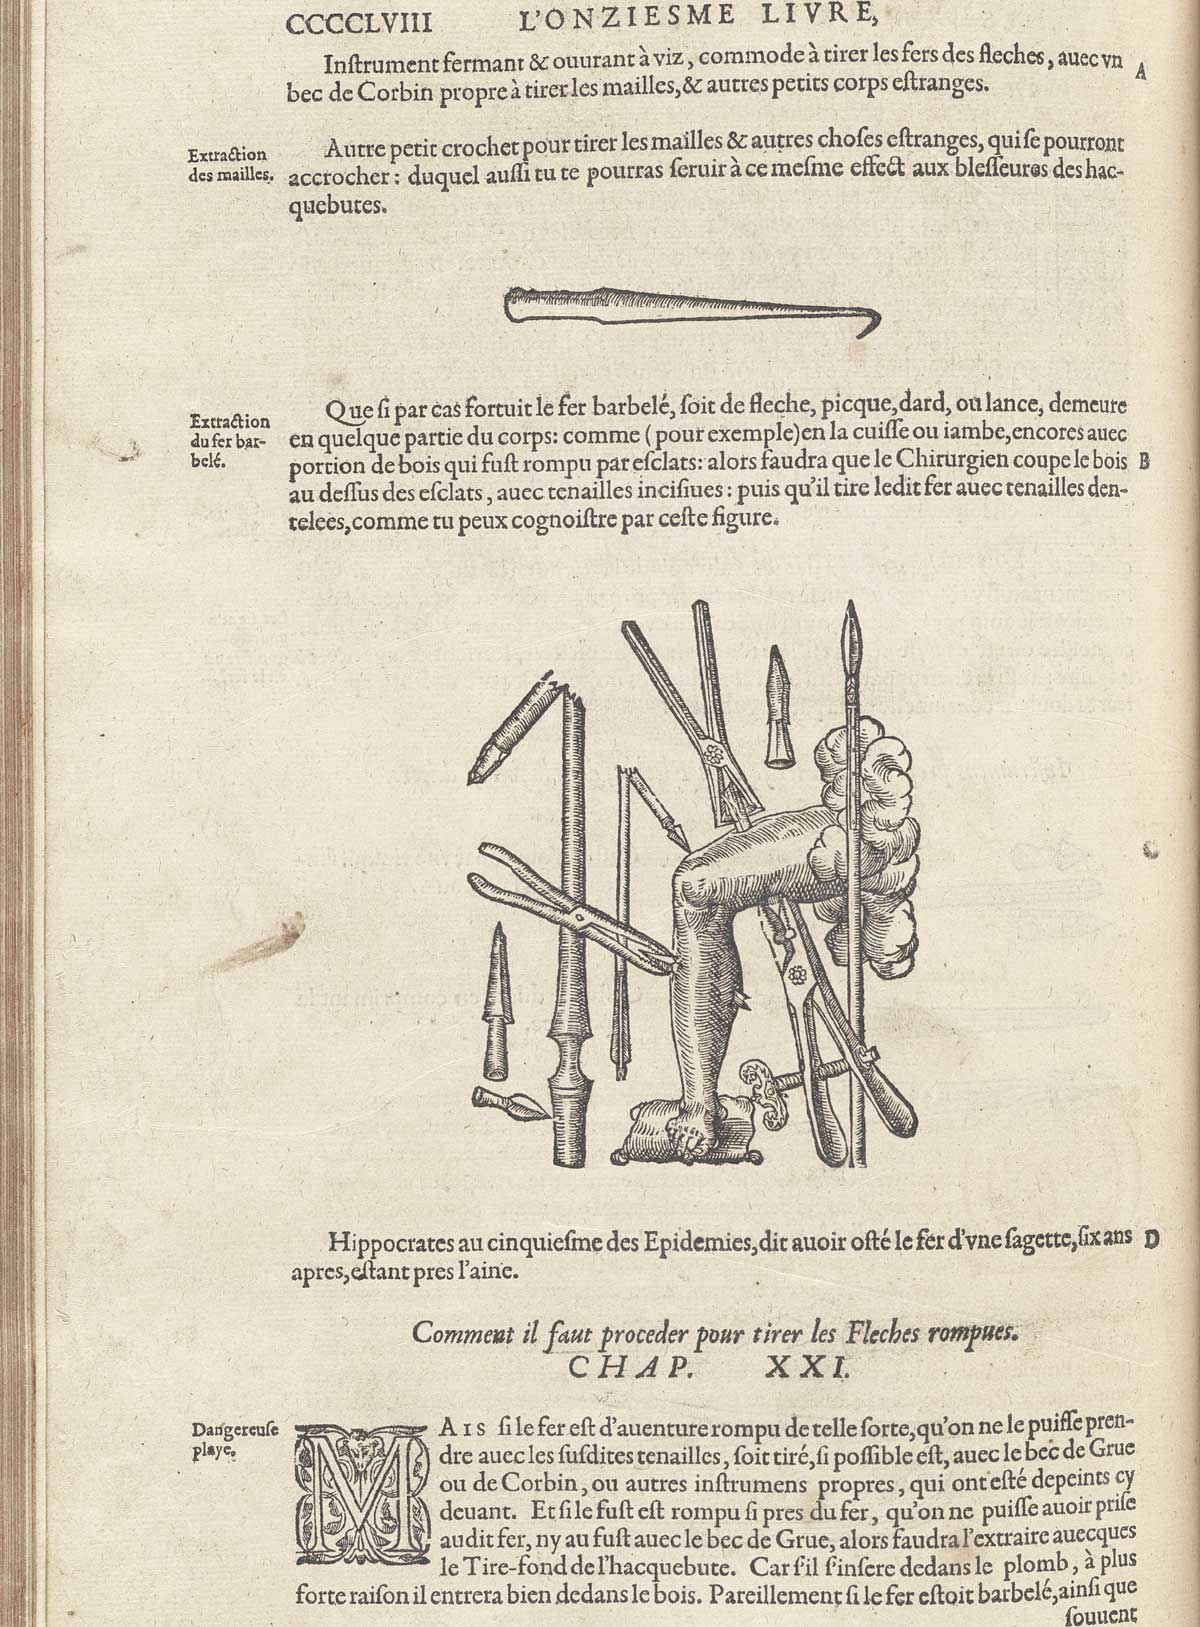 Page CCCCLVIII which features how use the instruments to remove broken arrows with descriptive text.